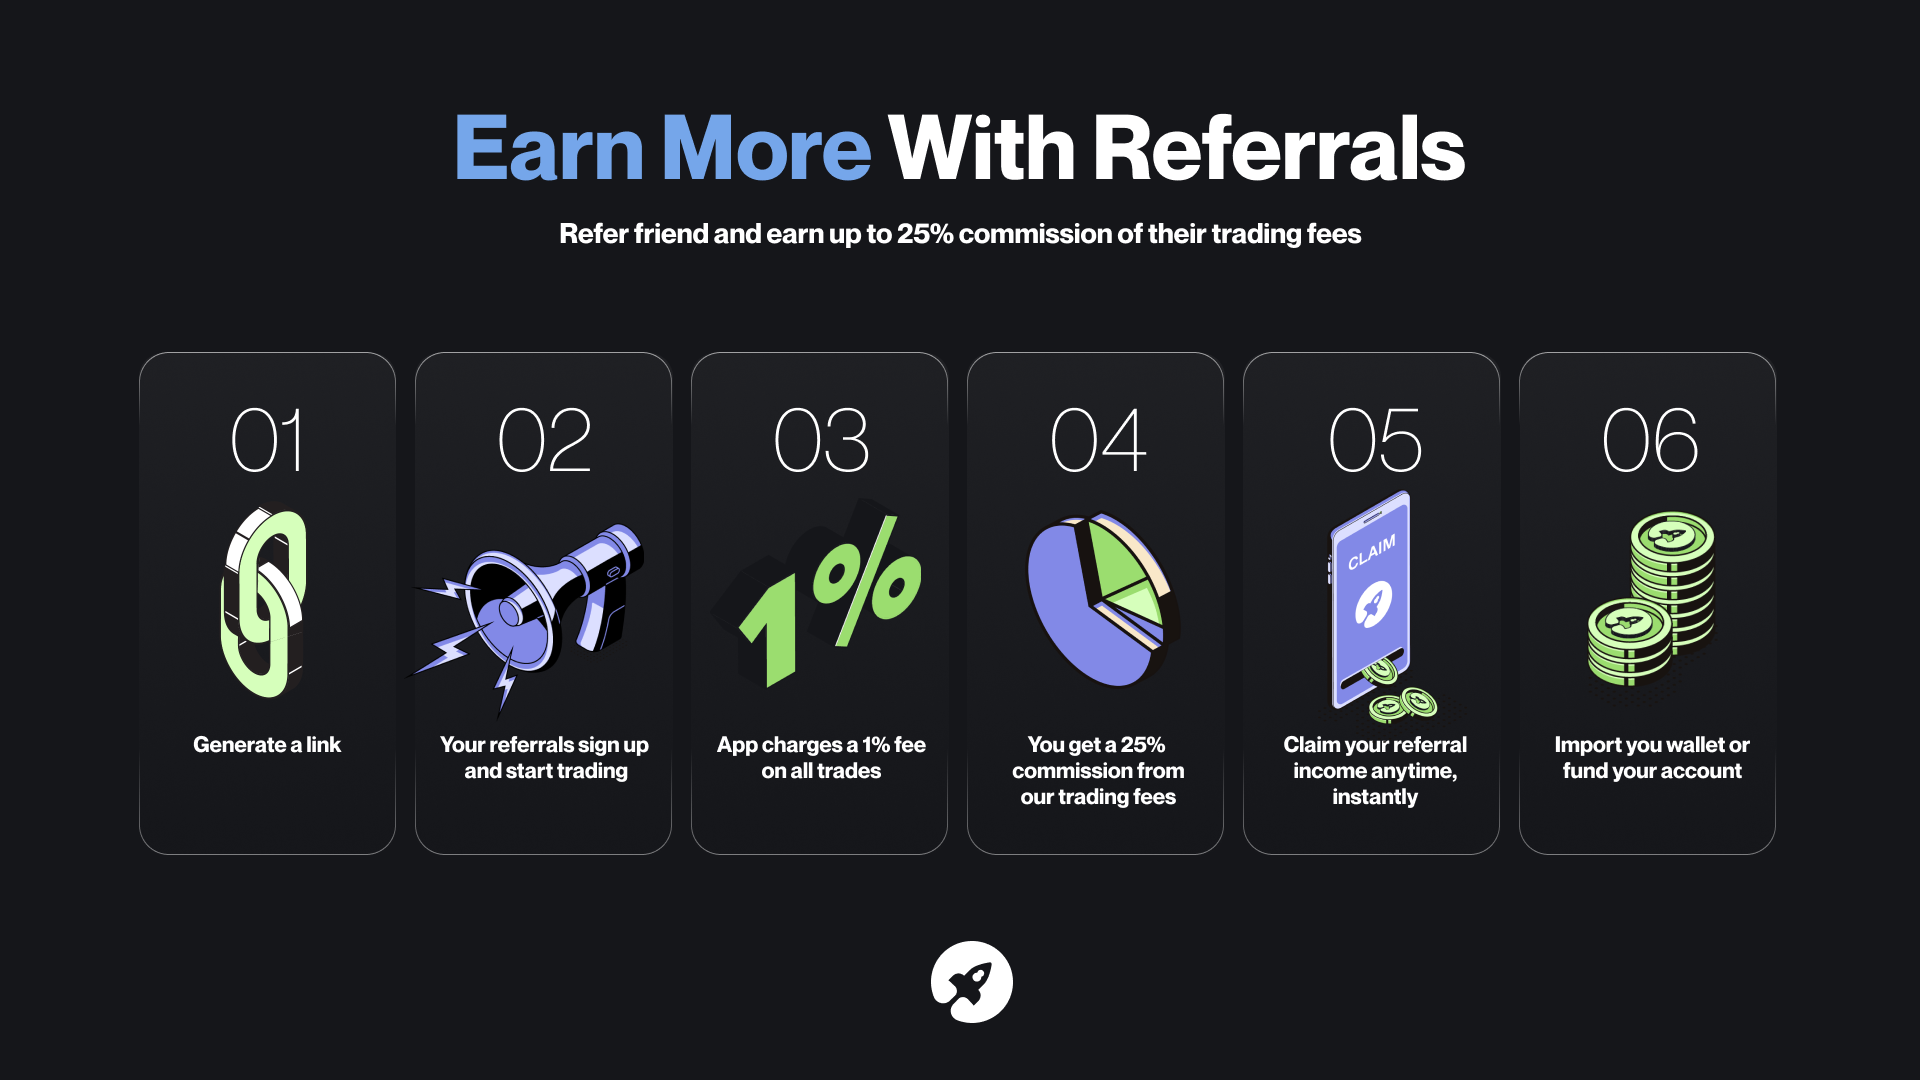 Earn More With Referrals